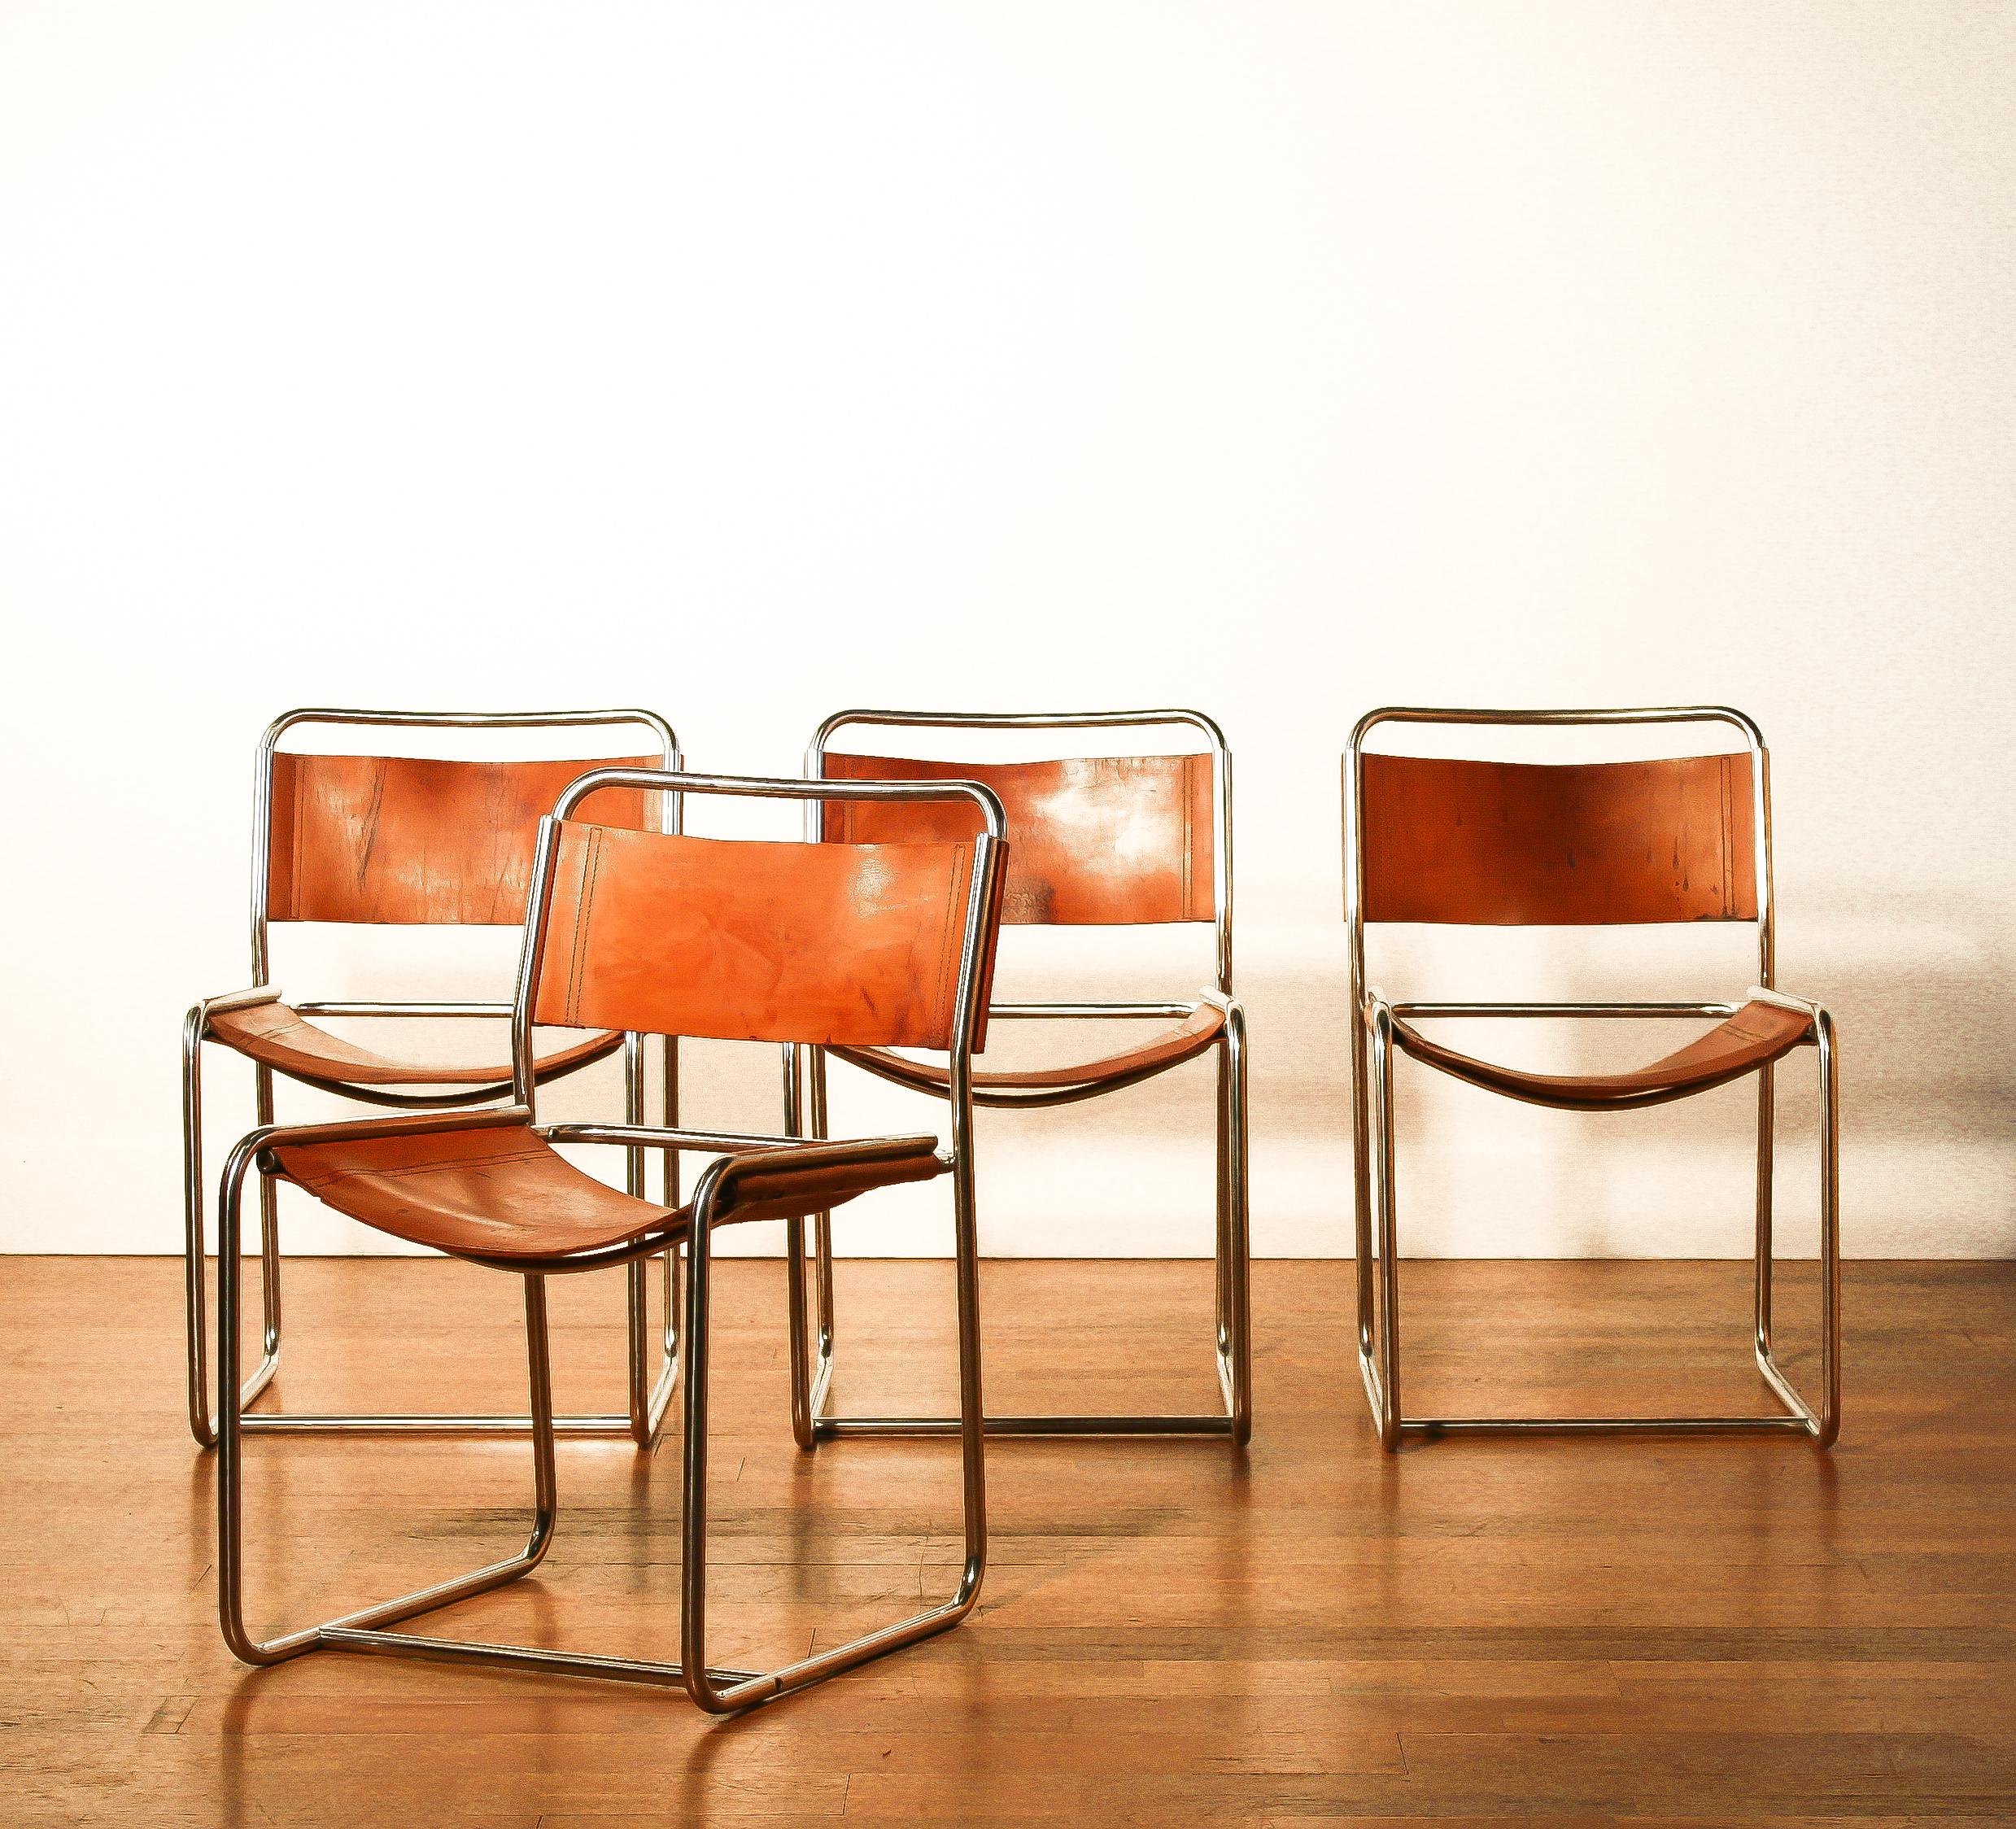 A nice set of four dining chairs designed by Paul Ibens & Clair Bataille.
The seat and the backrest are made of sturdy cognac leather. 
The frame consists of steel tube that is shaped like a cube. 
The chairs are in a very nice used